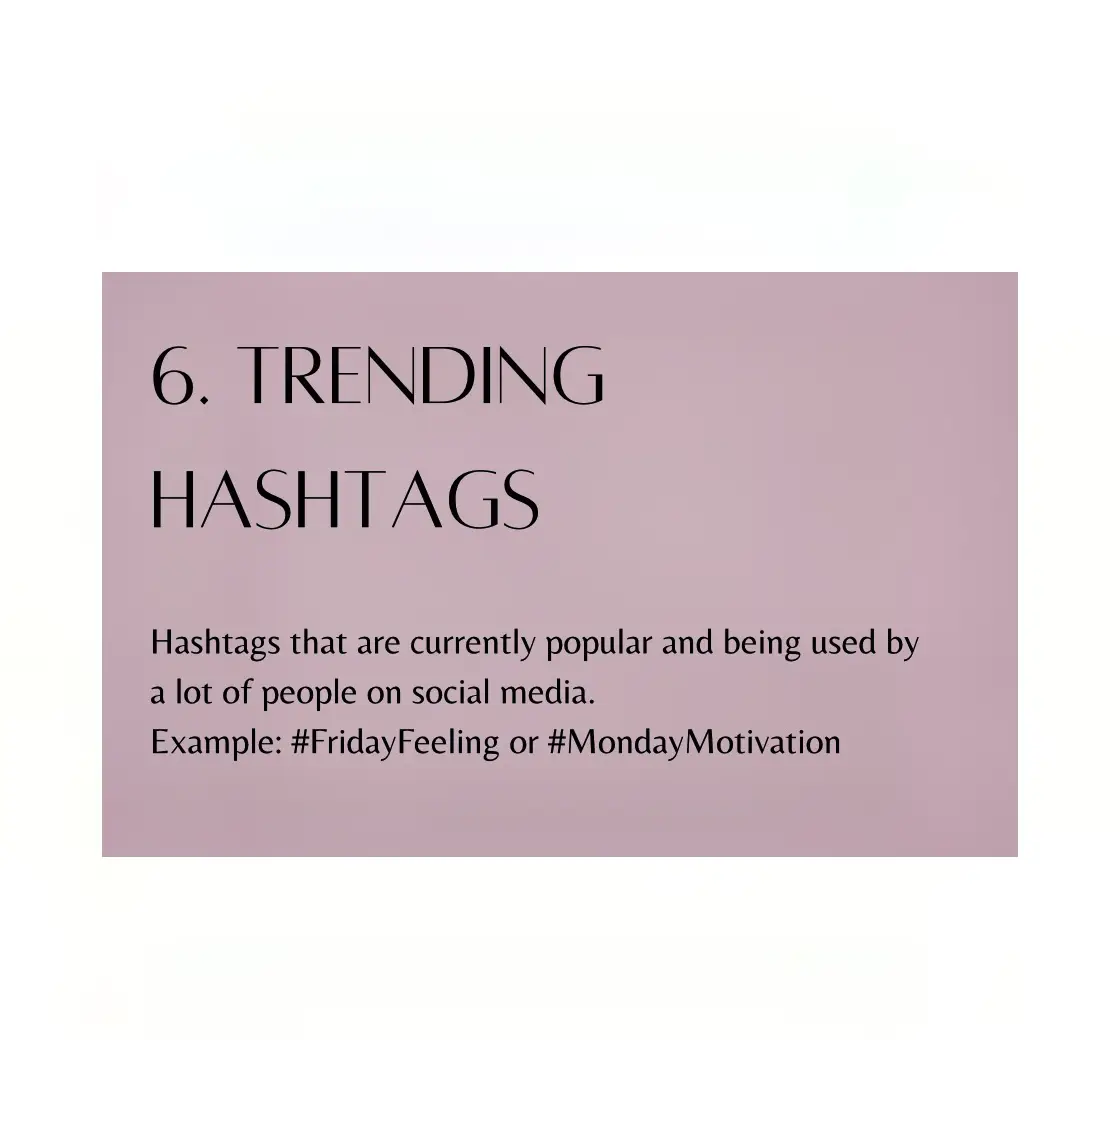  6. Trending hashtags that are currently popular and being used by a lot of people on social media.